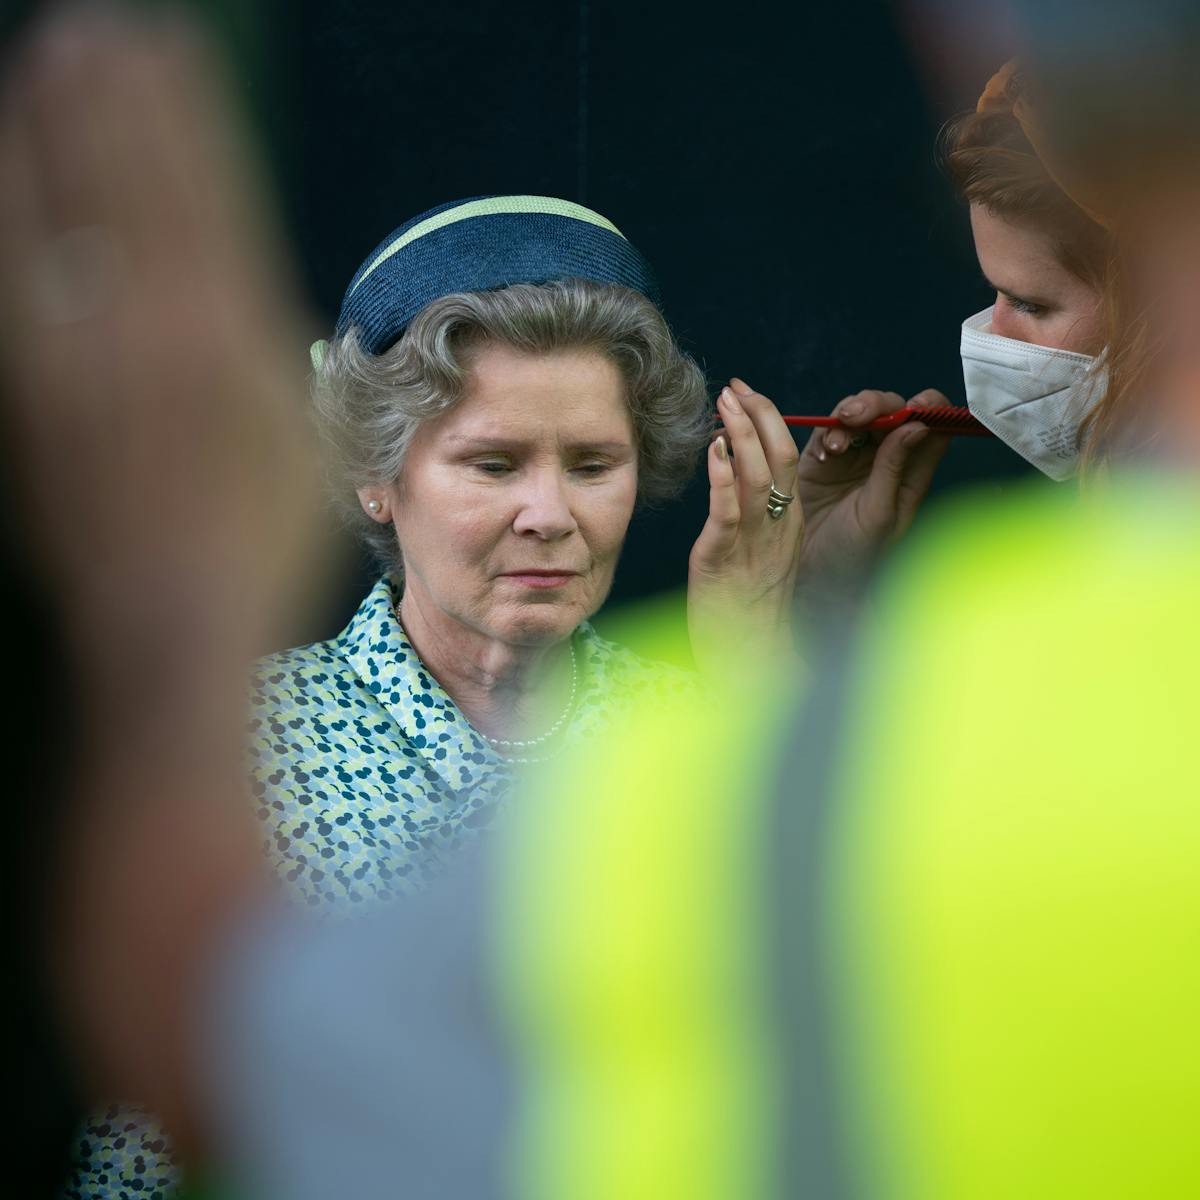 Someone touches up Imelda Staunton's hair in a solemn moment.